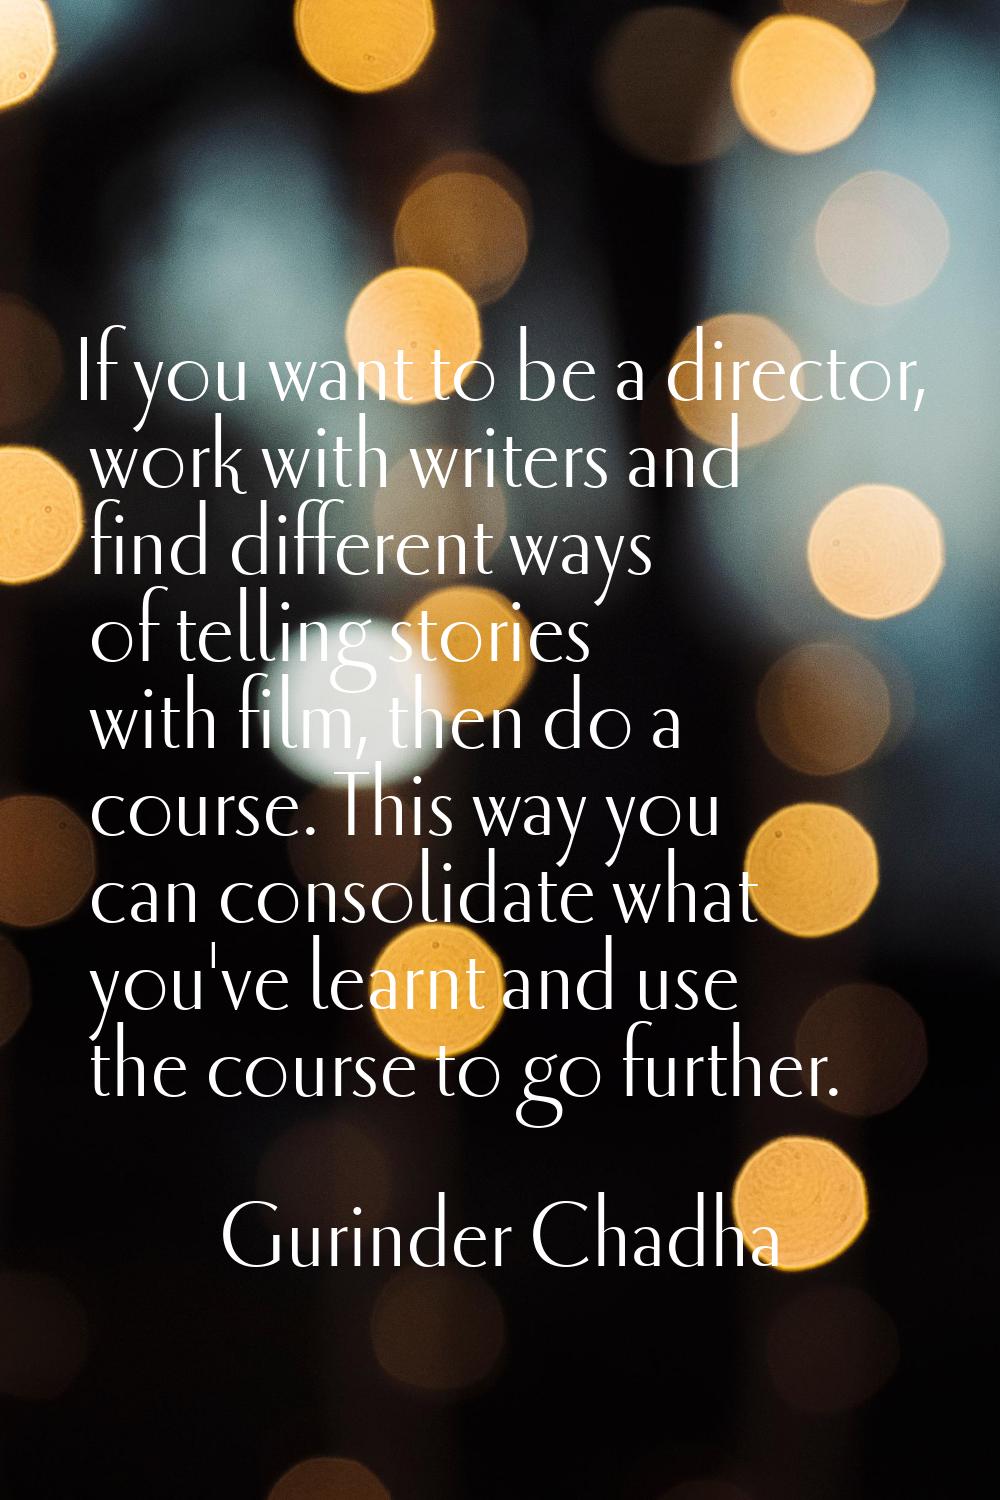 If you want to be a director, work with writers and find different ways of telling stories with fil